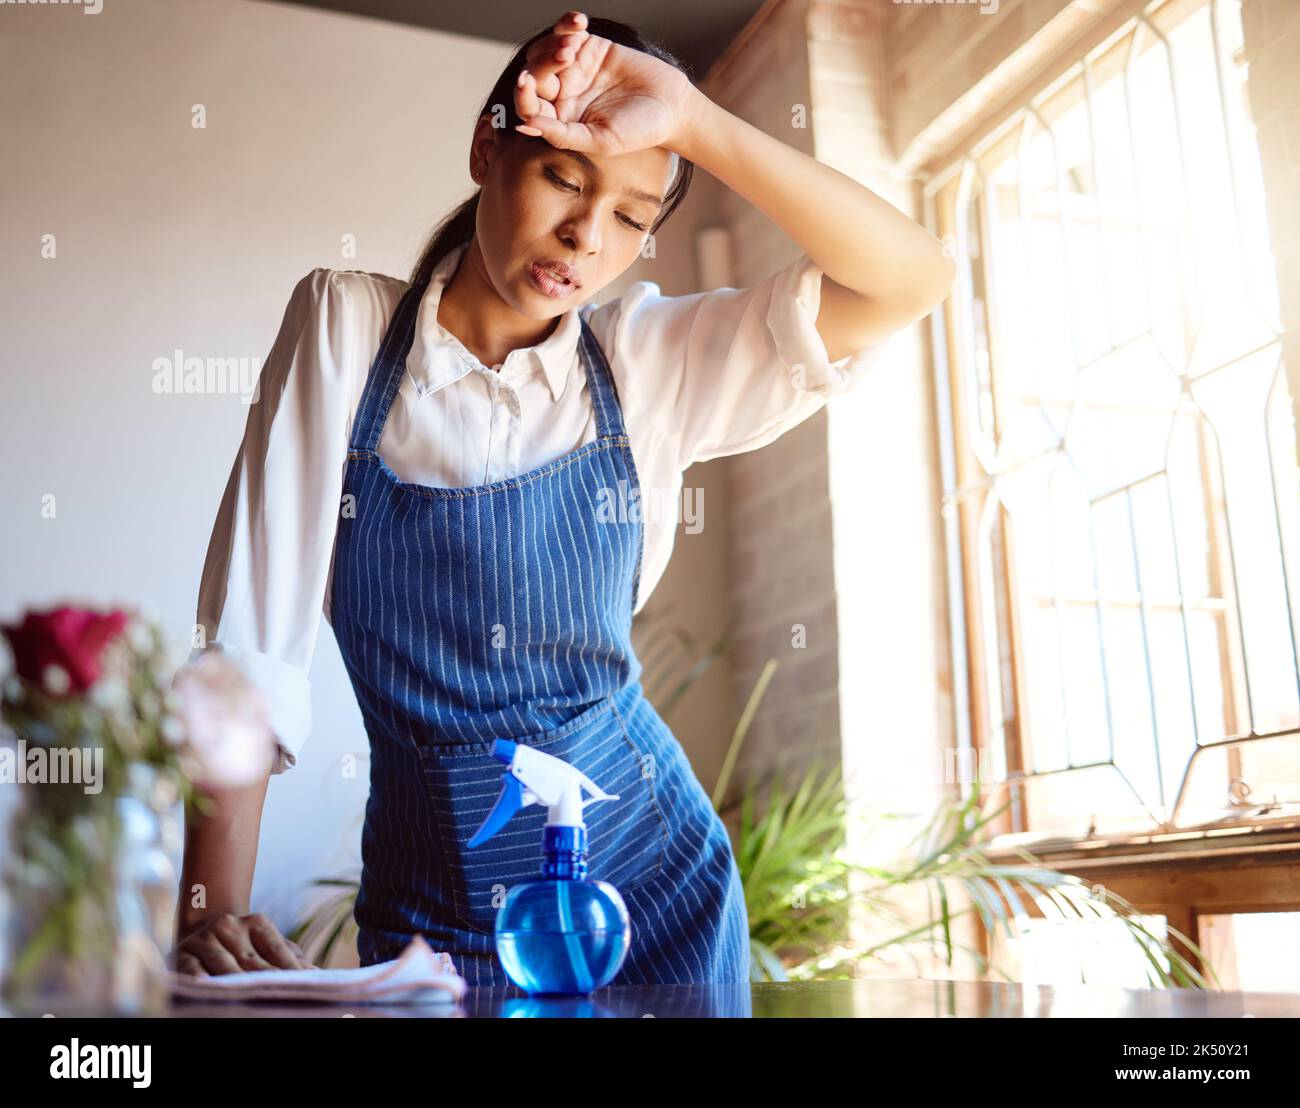 Cleaning house, burnout and tired cleaner working hard on dirty table and furniture feeling exhausted. Unhappy, frustrated and sweaty woman overworked Stock Photo